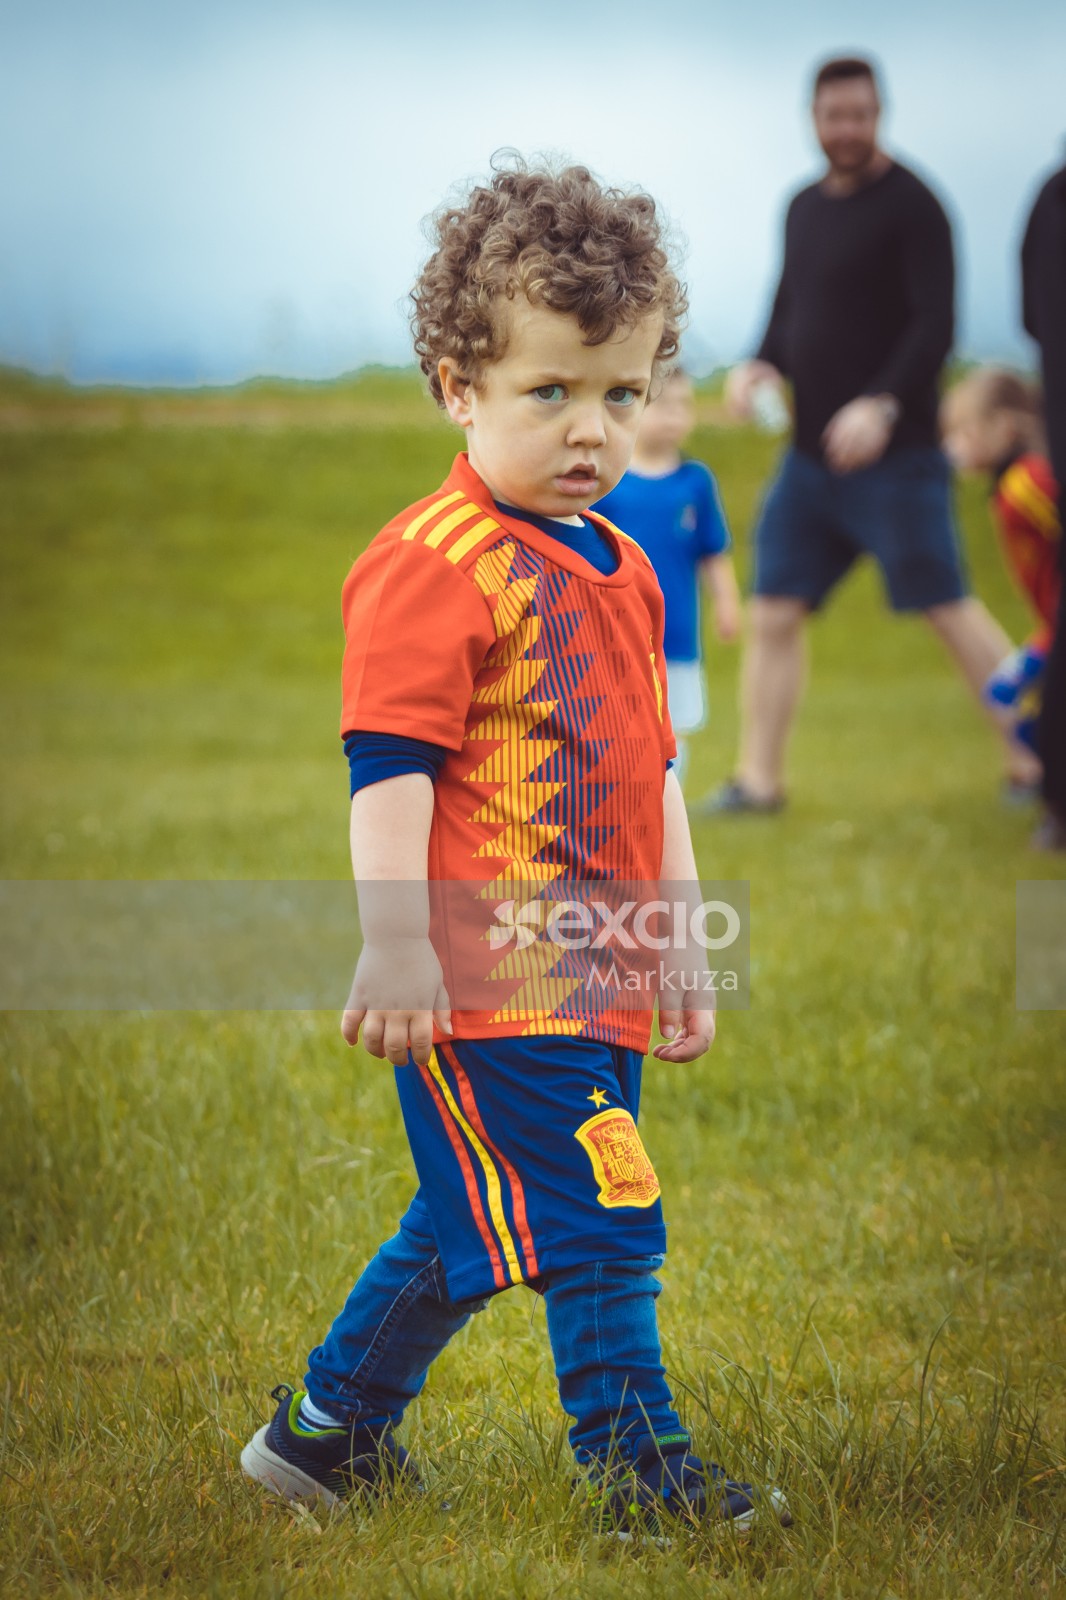 Curly haired boy in Manchester United kit walking on grass - Little Dribblers